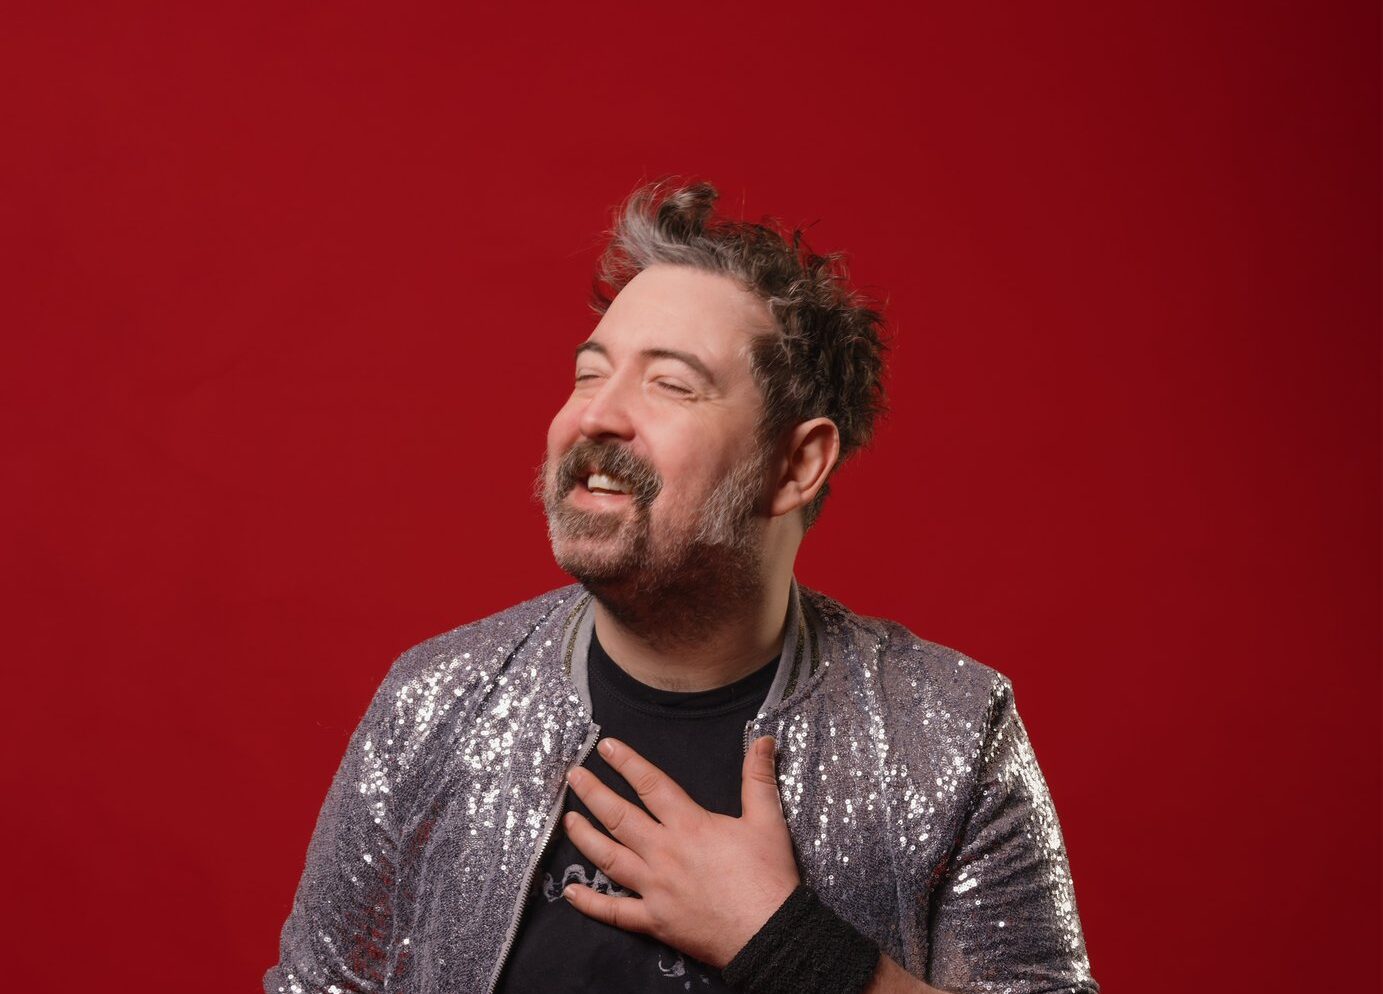 nick helm against a red background wearing a black t shirt and silver jacket